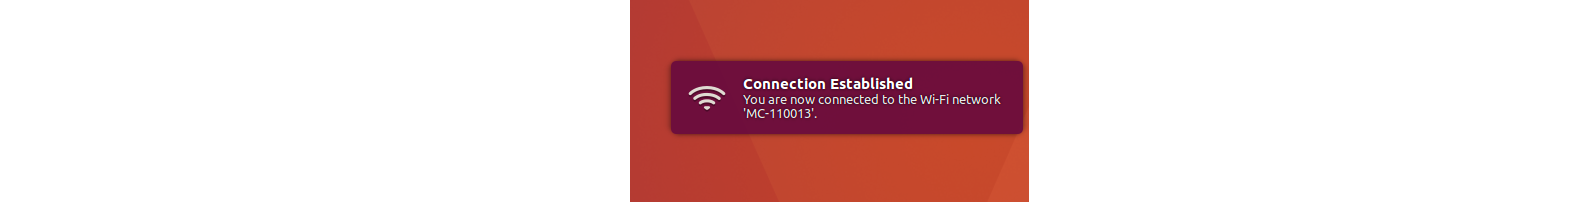 Wi-Fi connected for Linux 2.0 white border